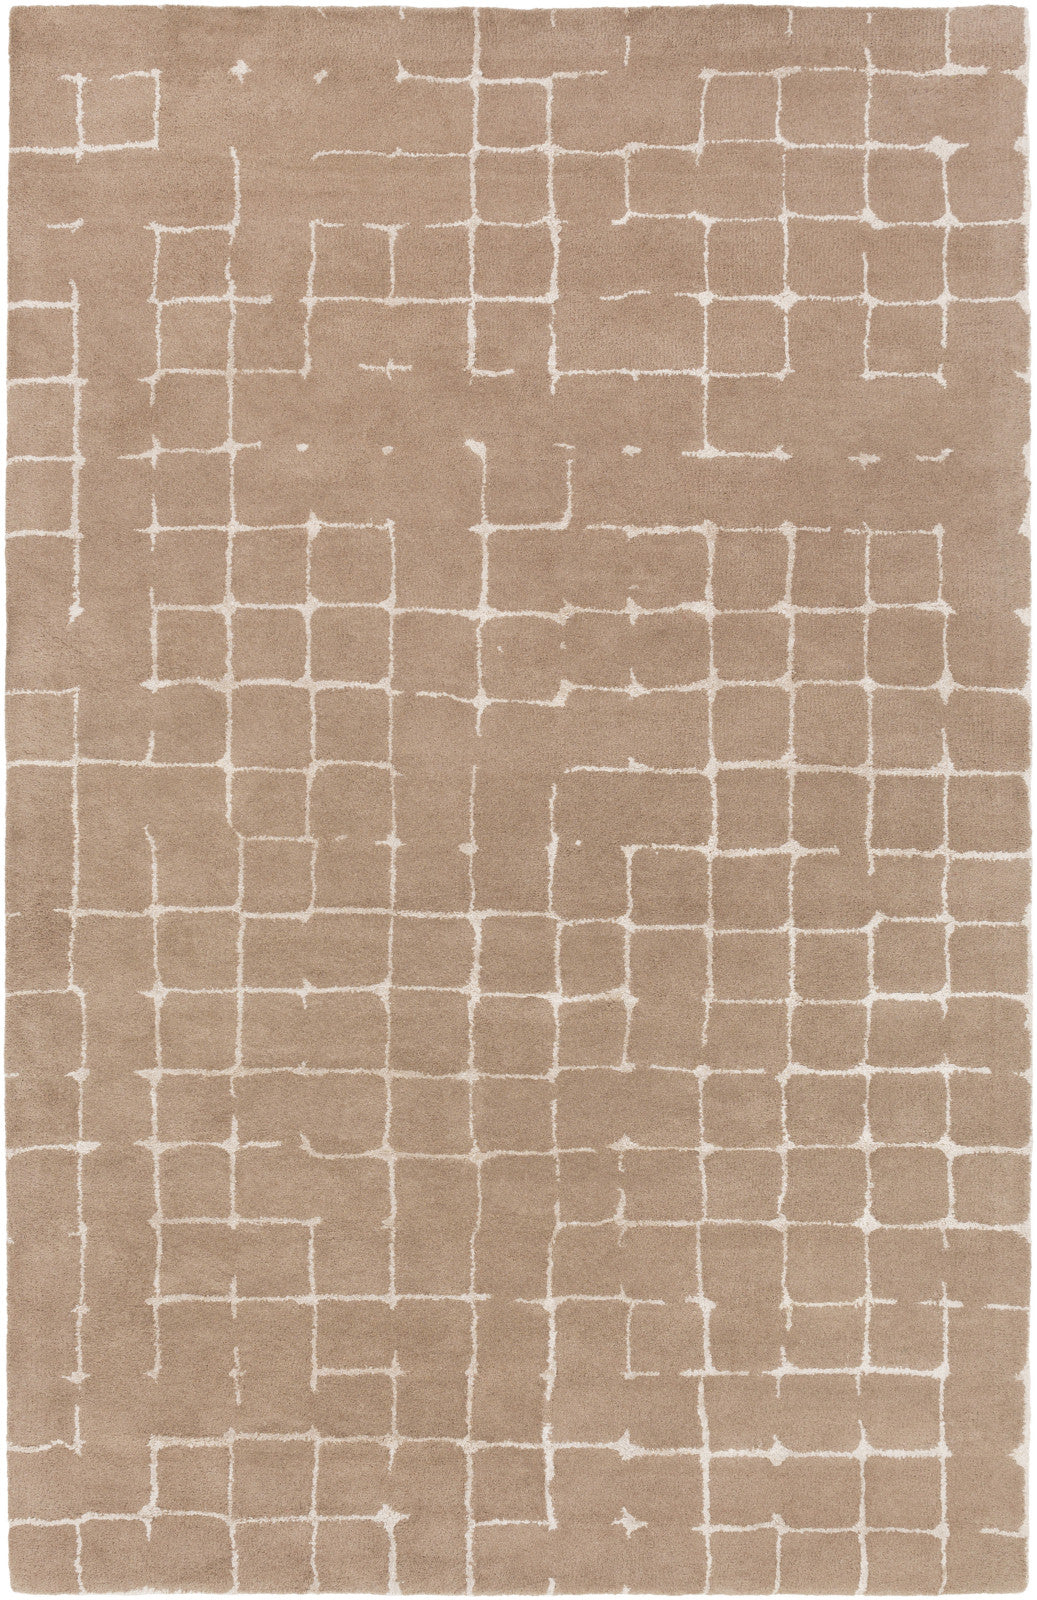 Surya Pursuit PUT-6001 Taupe Area Rug by Mike Farrell main image